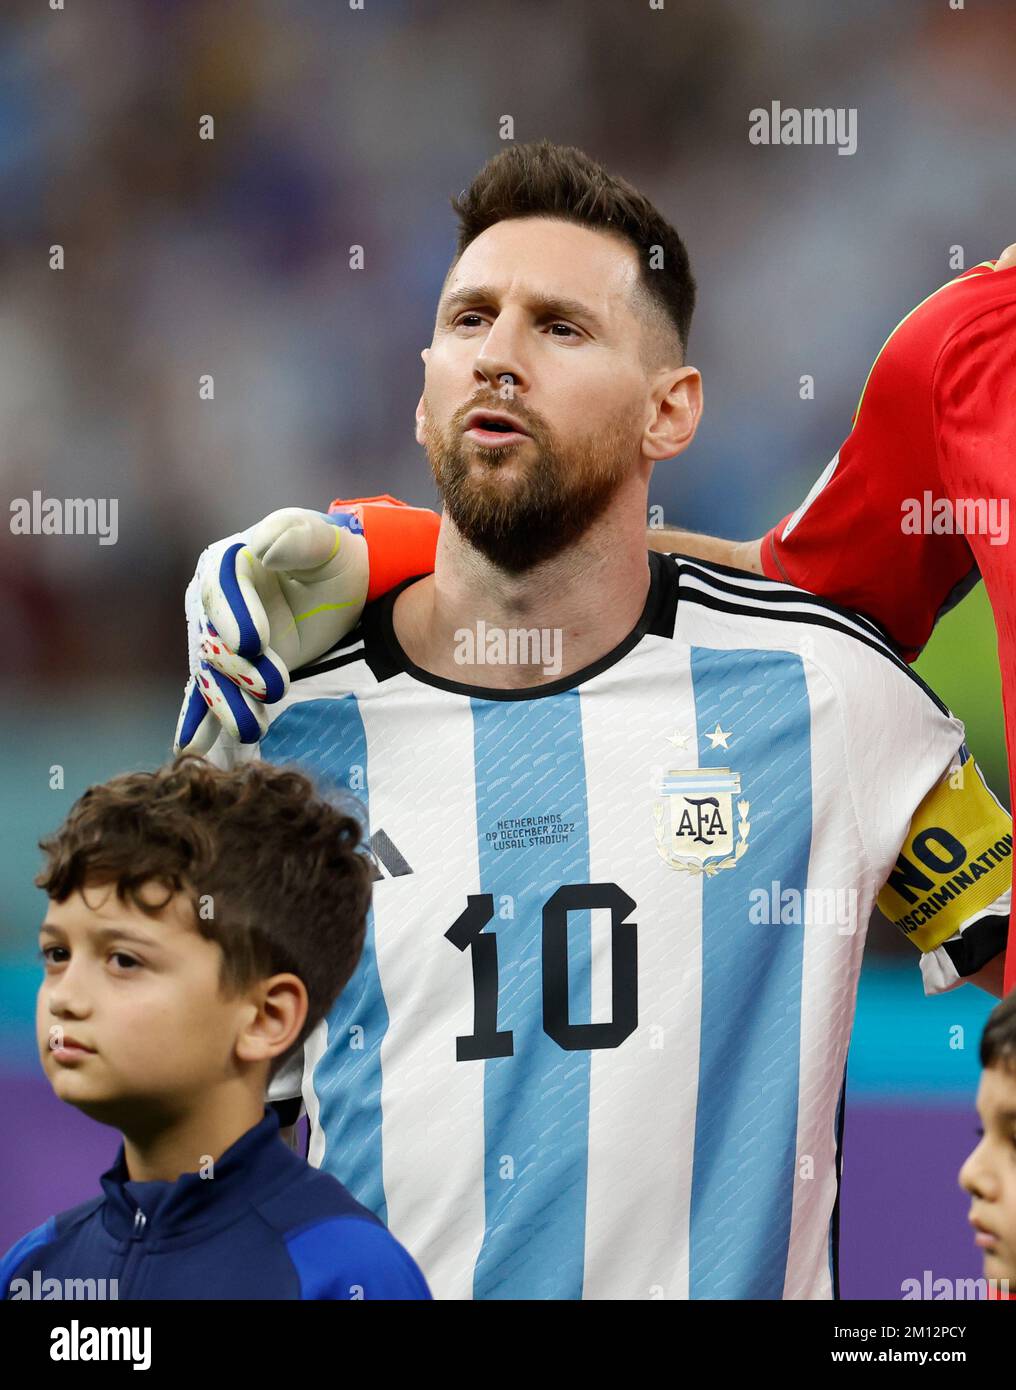 Lusail, Qatar. 9th Dec, 2022. Lionel Messi of Argentina reacts during the national anthem prior to the Quarterfinal between the Netherlands and Argentina of the 2022 FIFA World Cup at Lusail Stadium in Lusail, Qatar, Dec. 9, 2022. Credit: Wang Lili/Xinhua/Alamy Live News Stock Photo